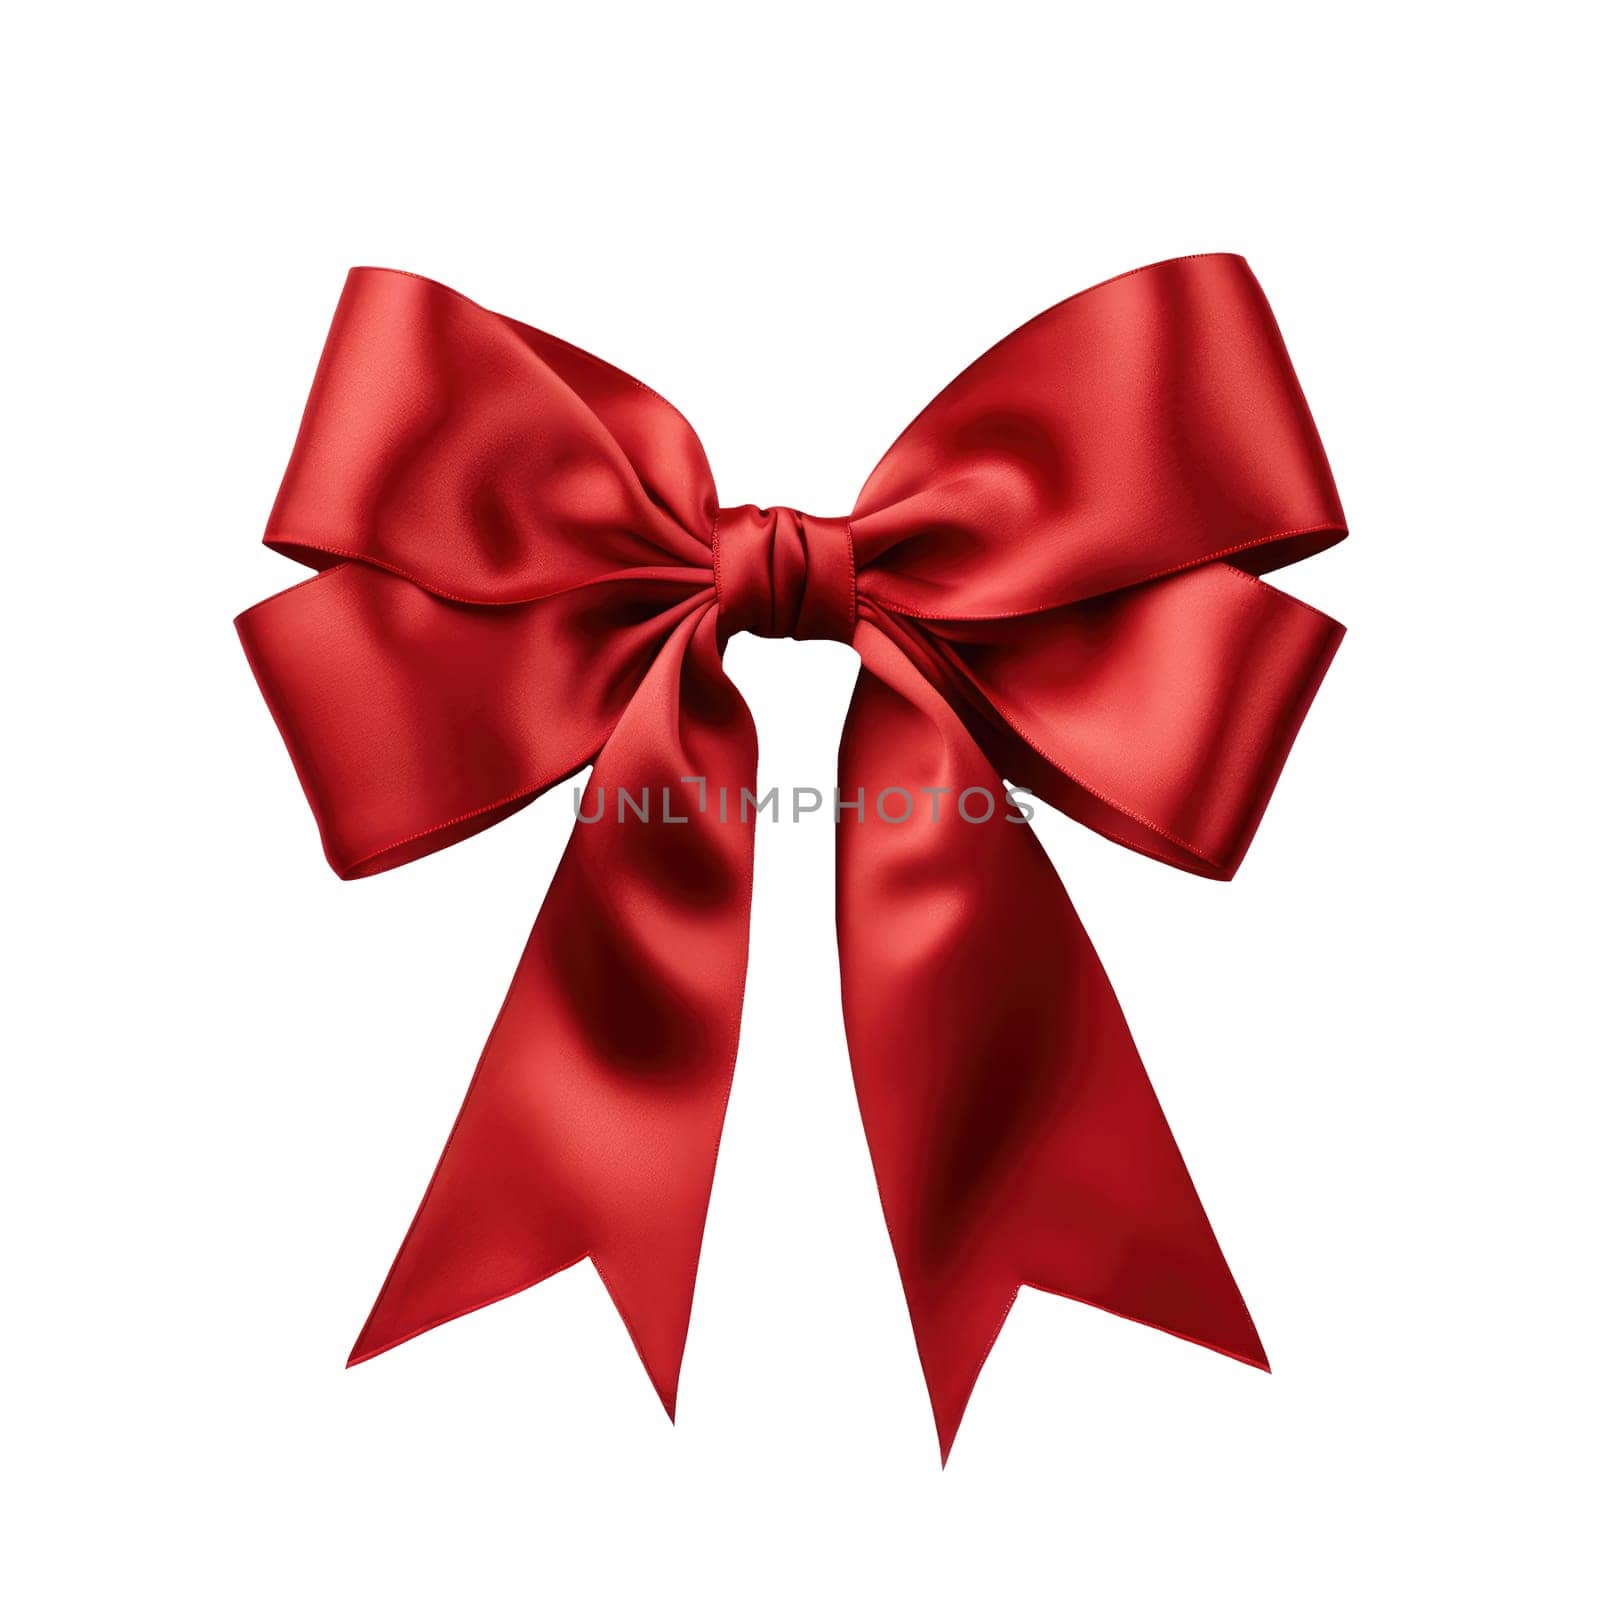 Red ribbon bow isolated on white background by natali_brill